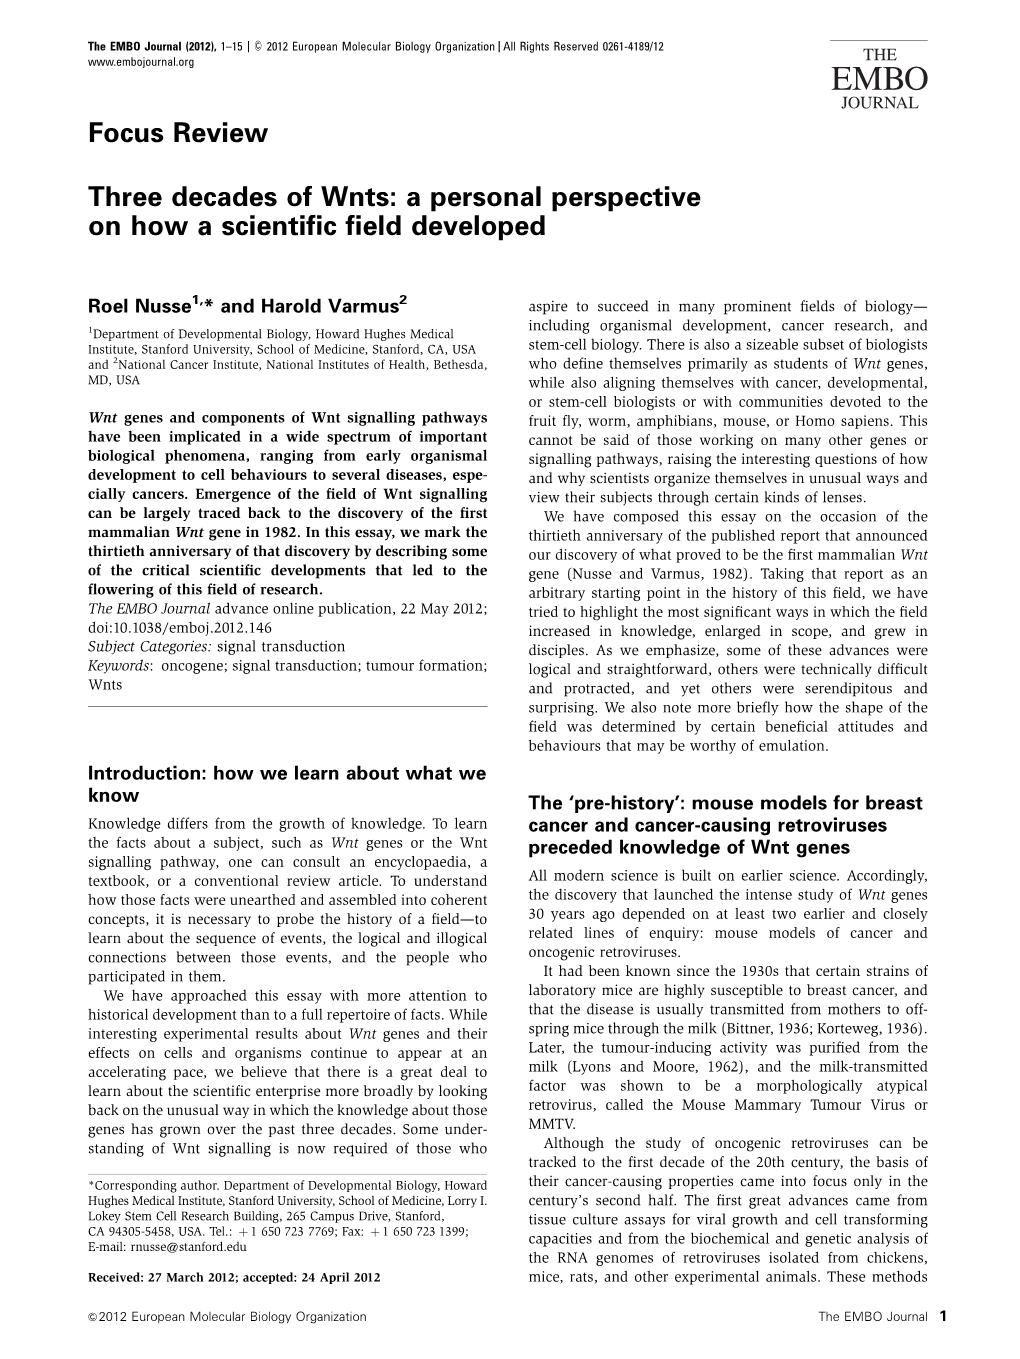 Three Decades of Wnts: a Personal Perspective on How a Scientific Field